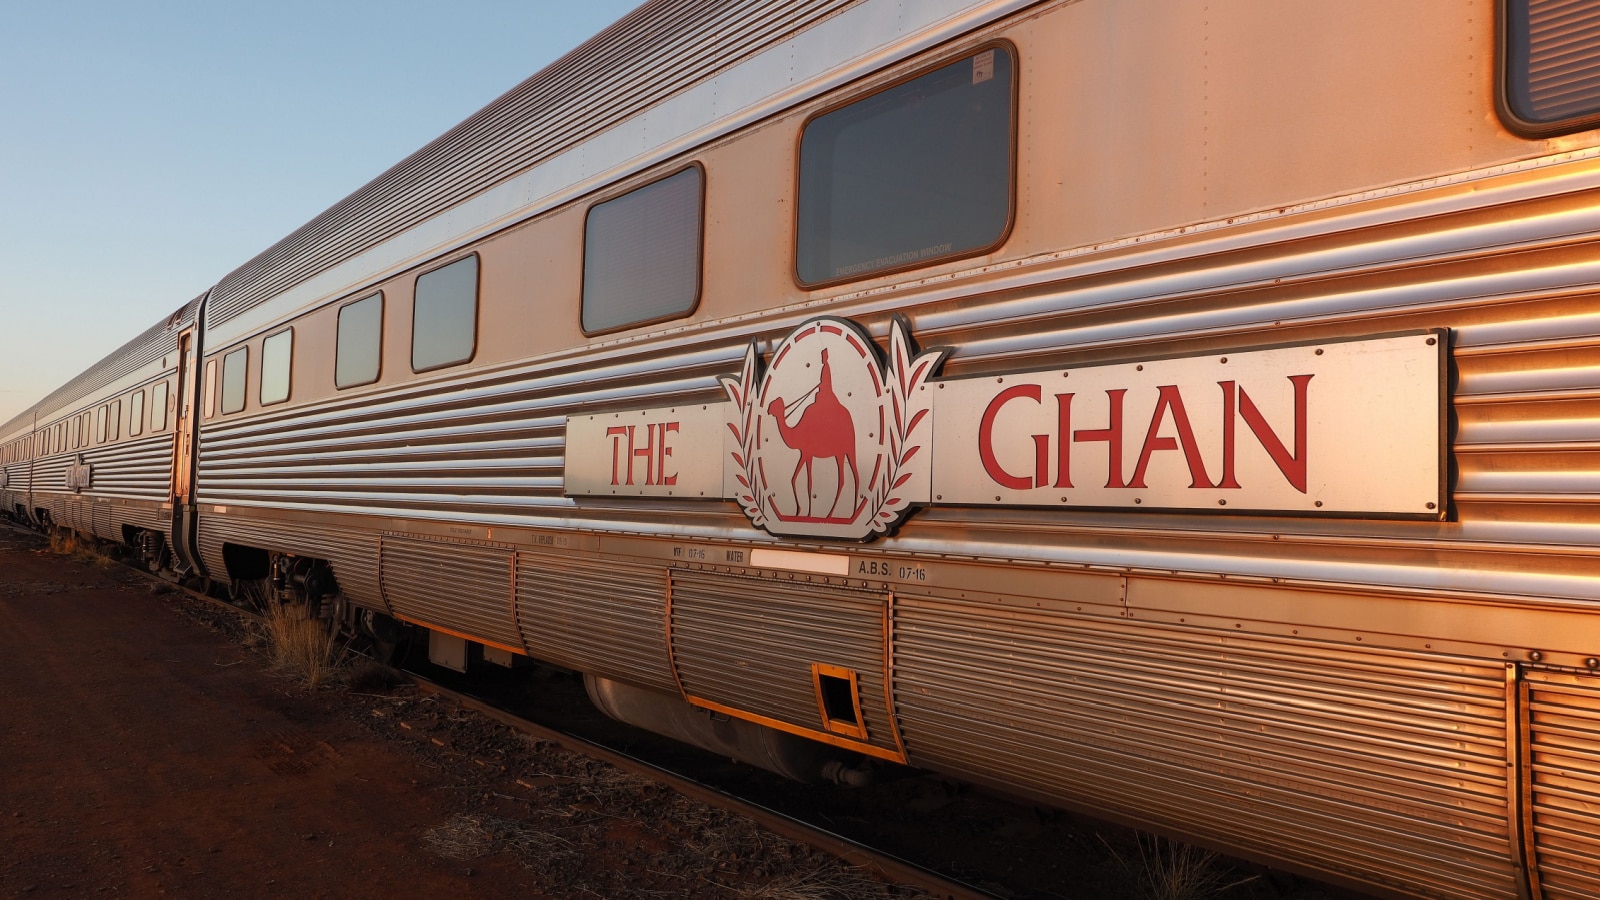 Marla, Australia - May 8, 2017: Carriages of the famous Ghan railway at a morning stop in Marla South Australia